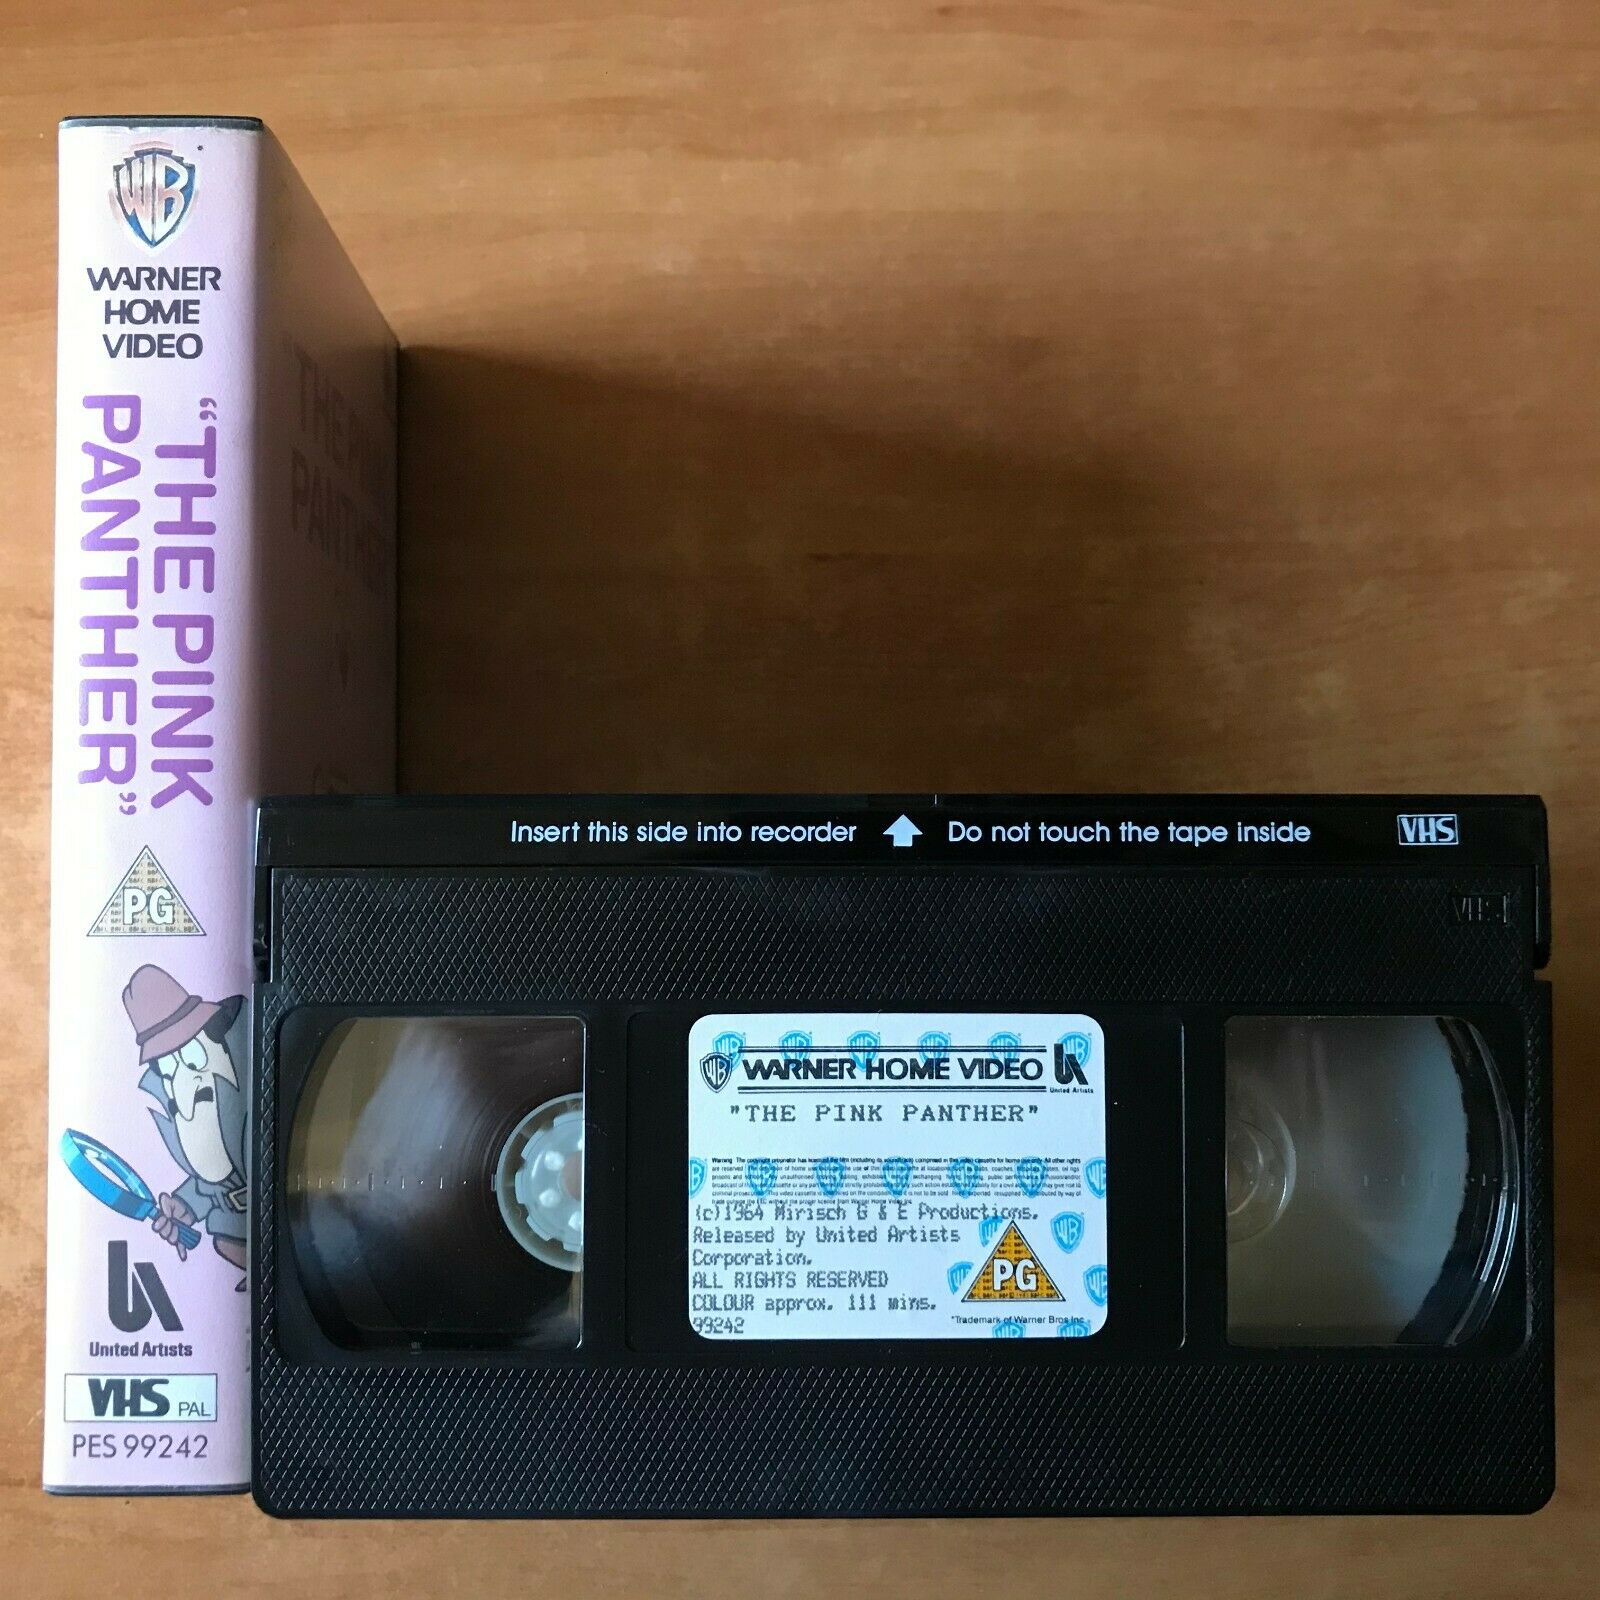 The Pink Panther [Blake Edwards] Comedy - Peter Sellers/Claudia Cardinale - VHS-